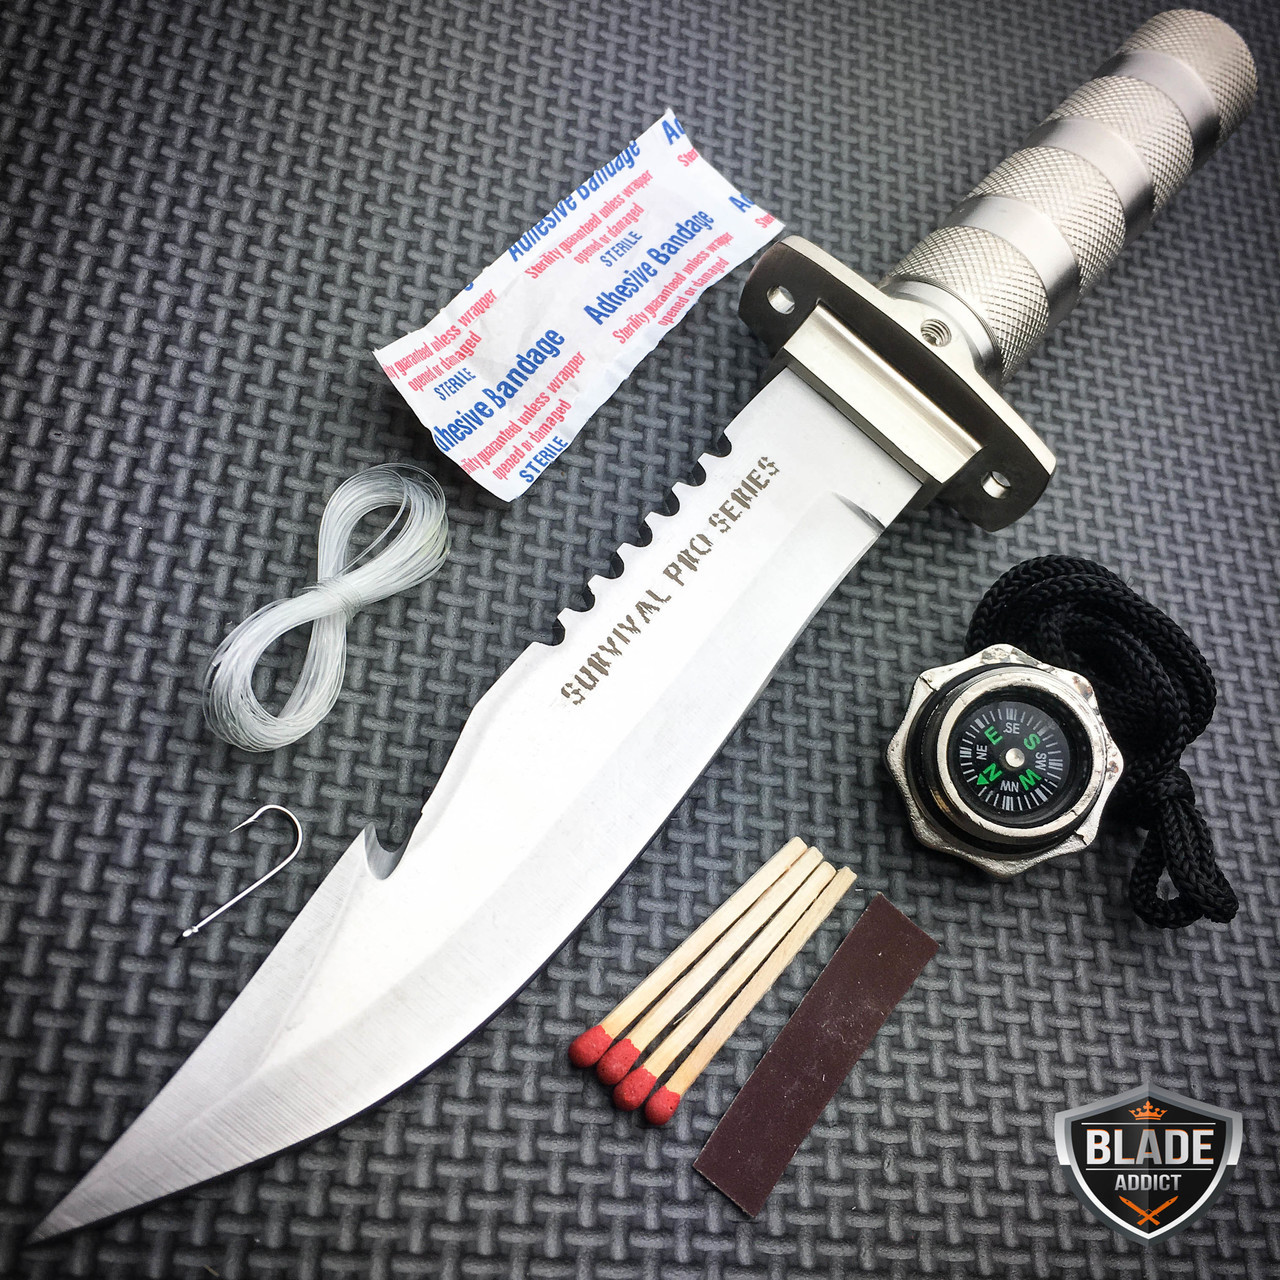 11 Tactical Fishing Hunting Survival Knife w/ Sheath Bowie Survival Kit  Camping - MEGAKNIFE